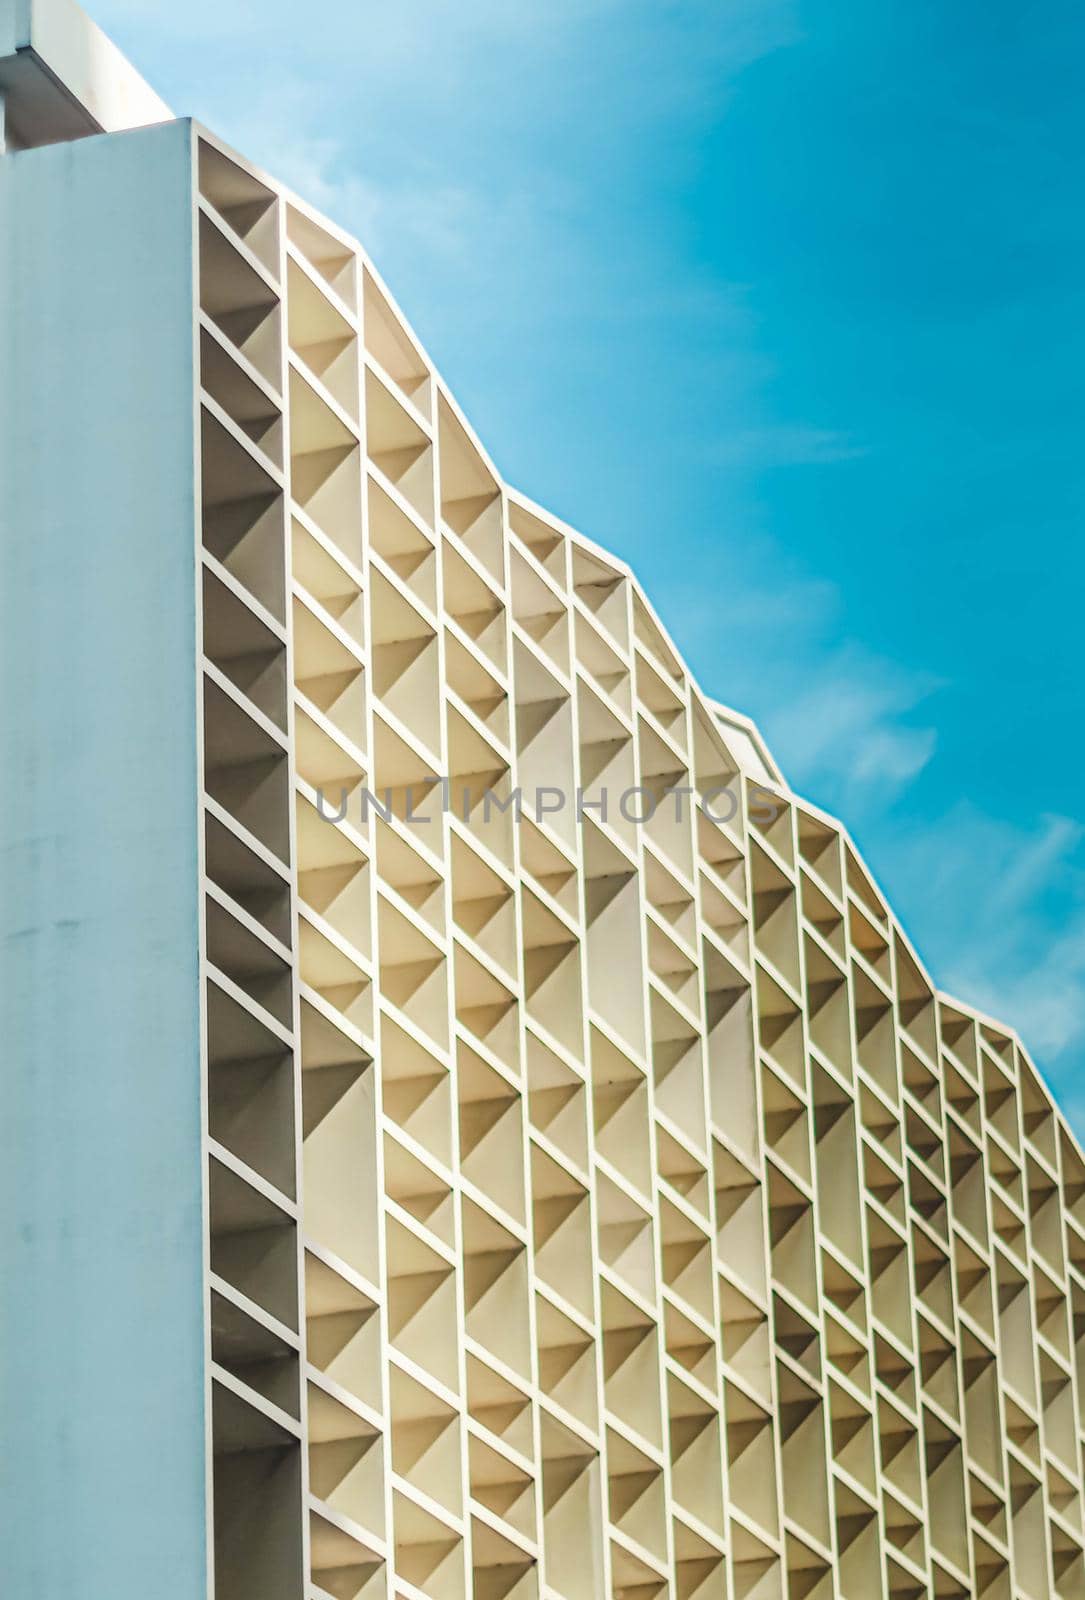 Building skin façade modern style showing shading divide (shade and shadow). Facade architecture elevation design